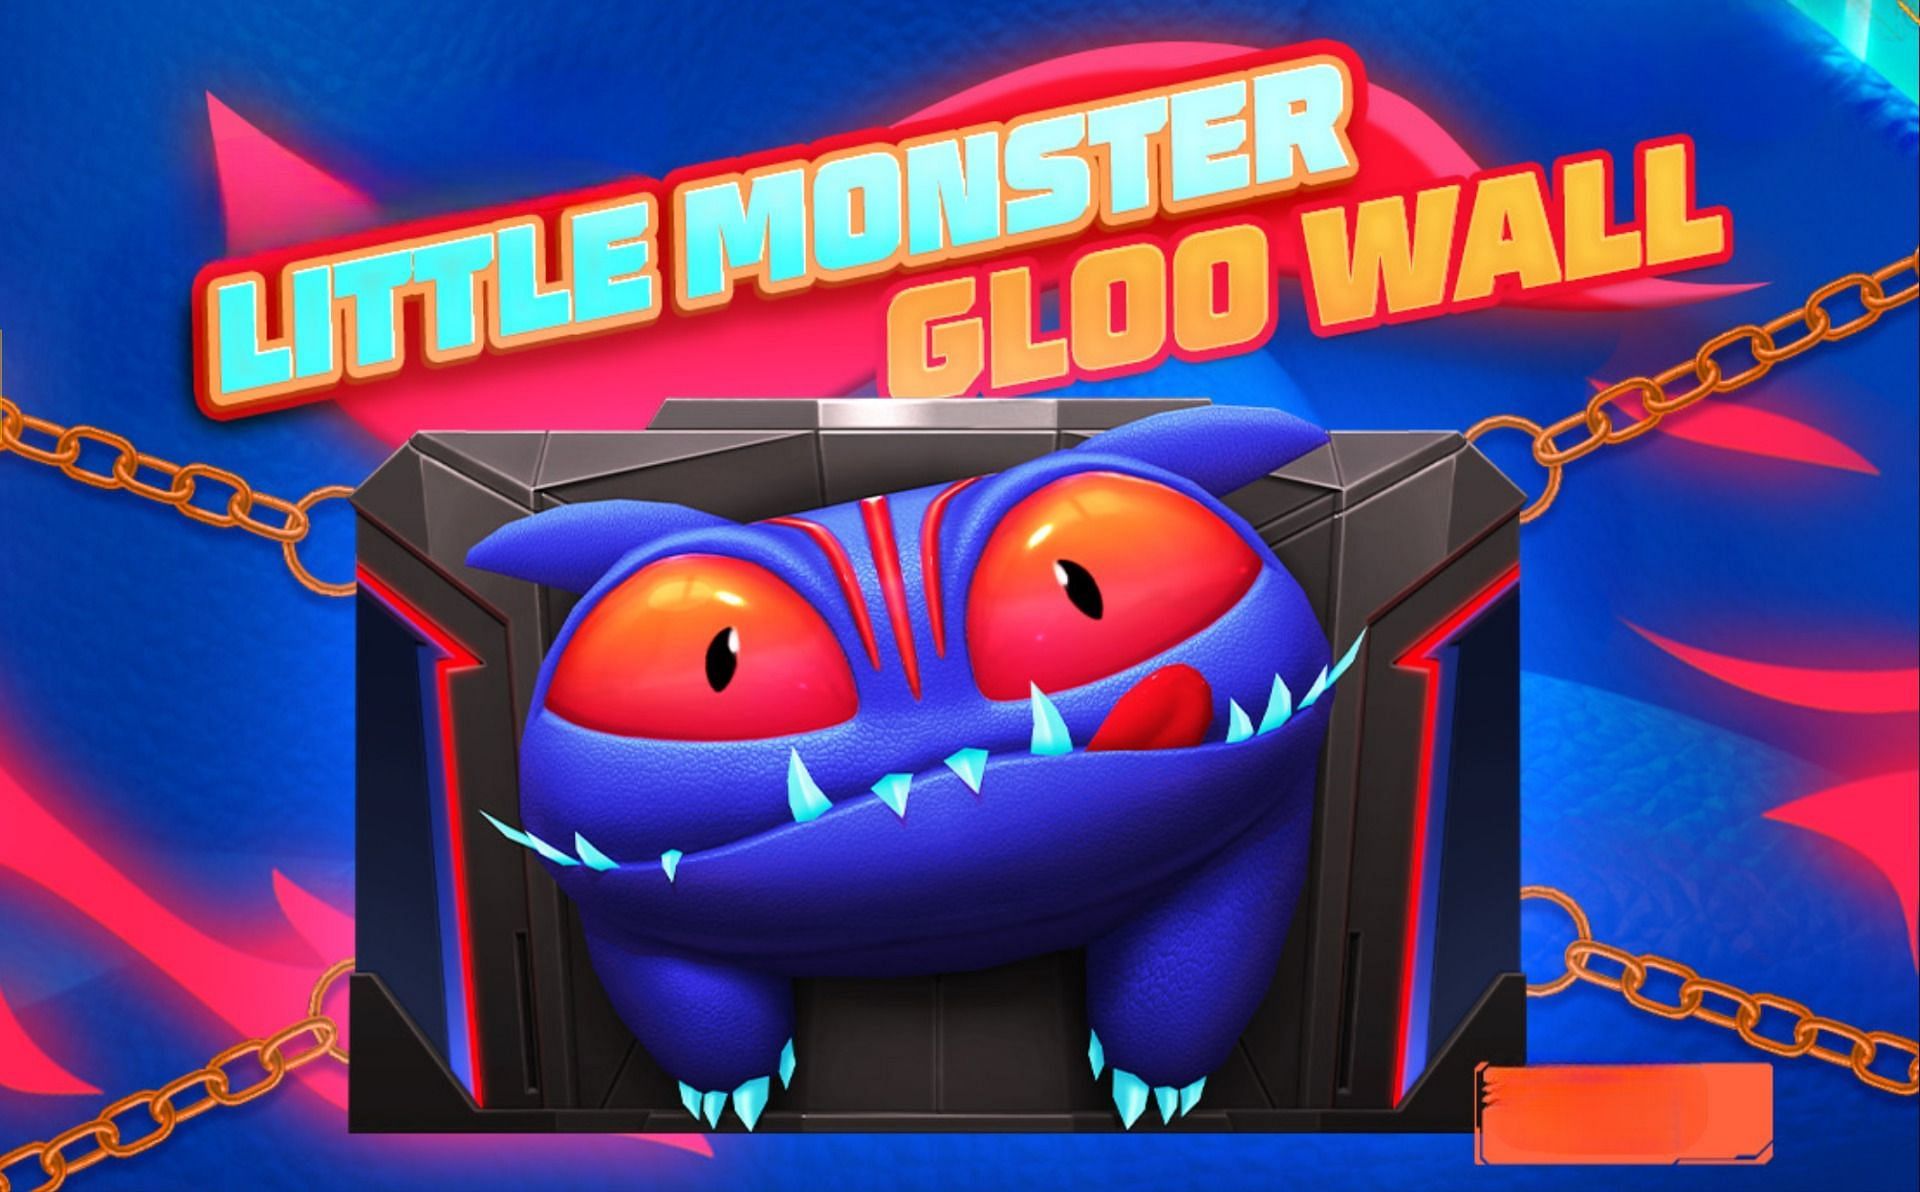 Free Fire Little Monster Wall event guide: Get Gloo Wall skin, pricing, and more